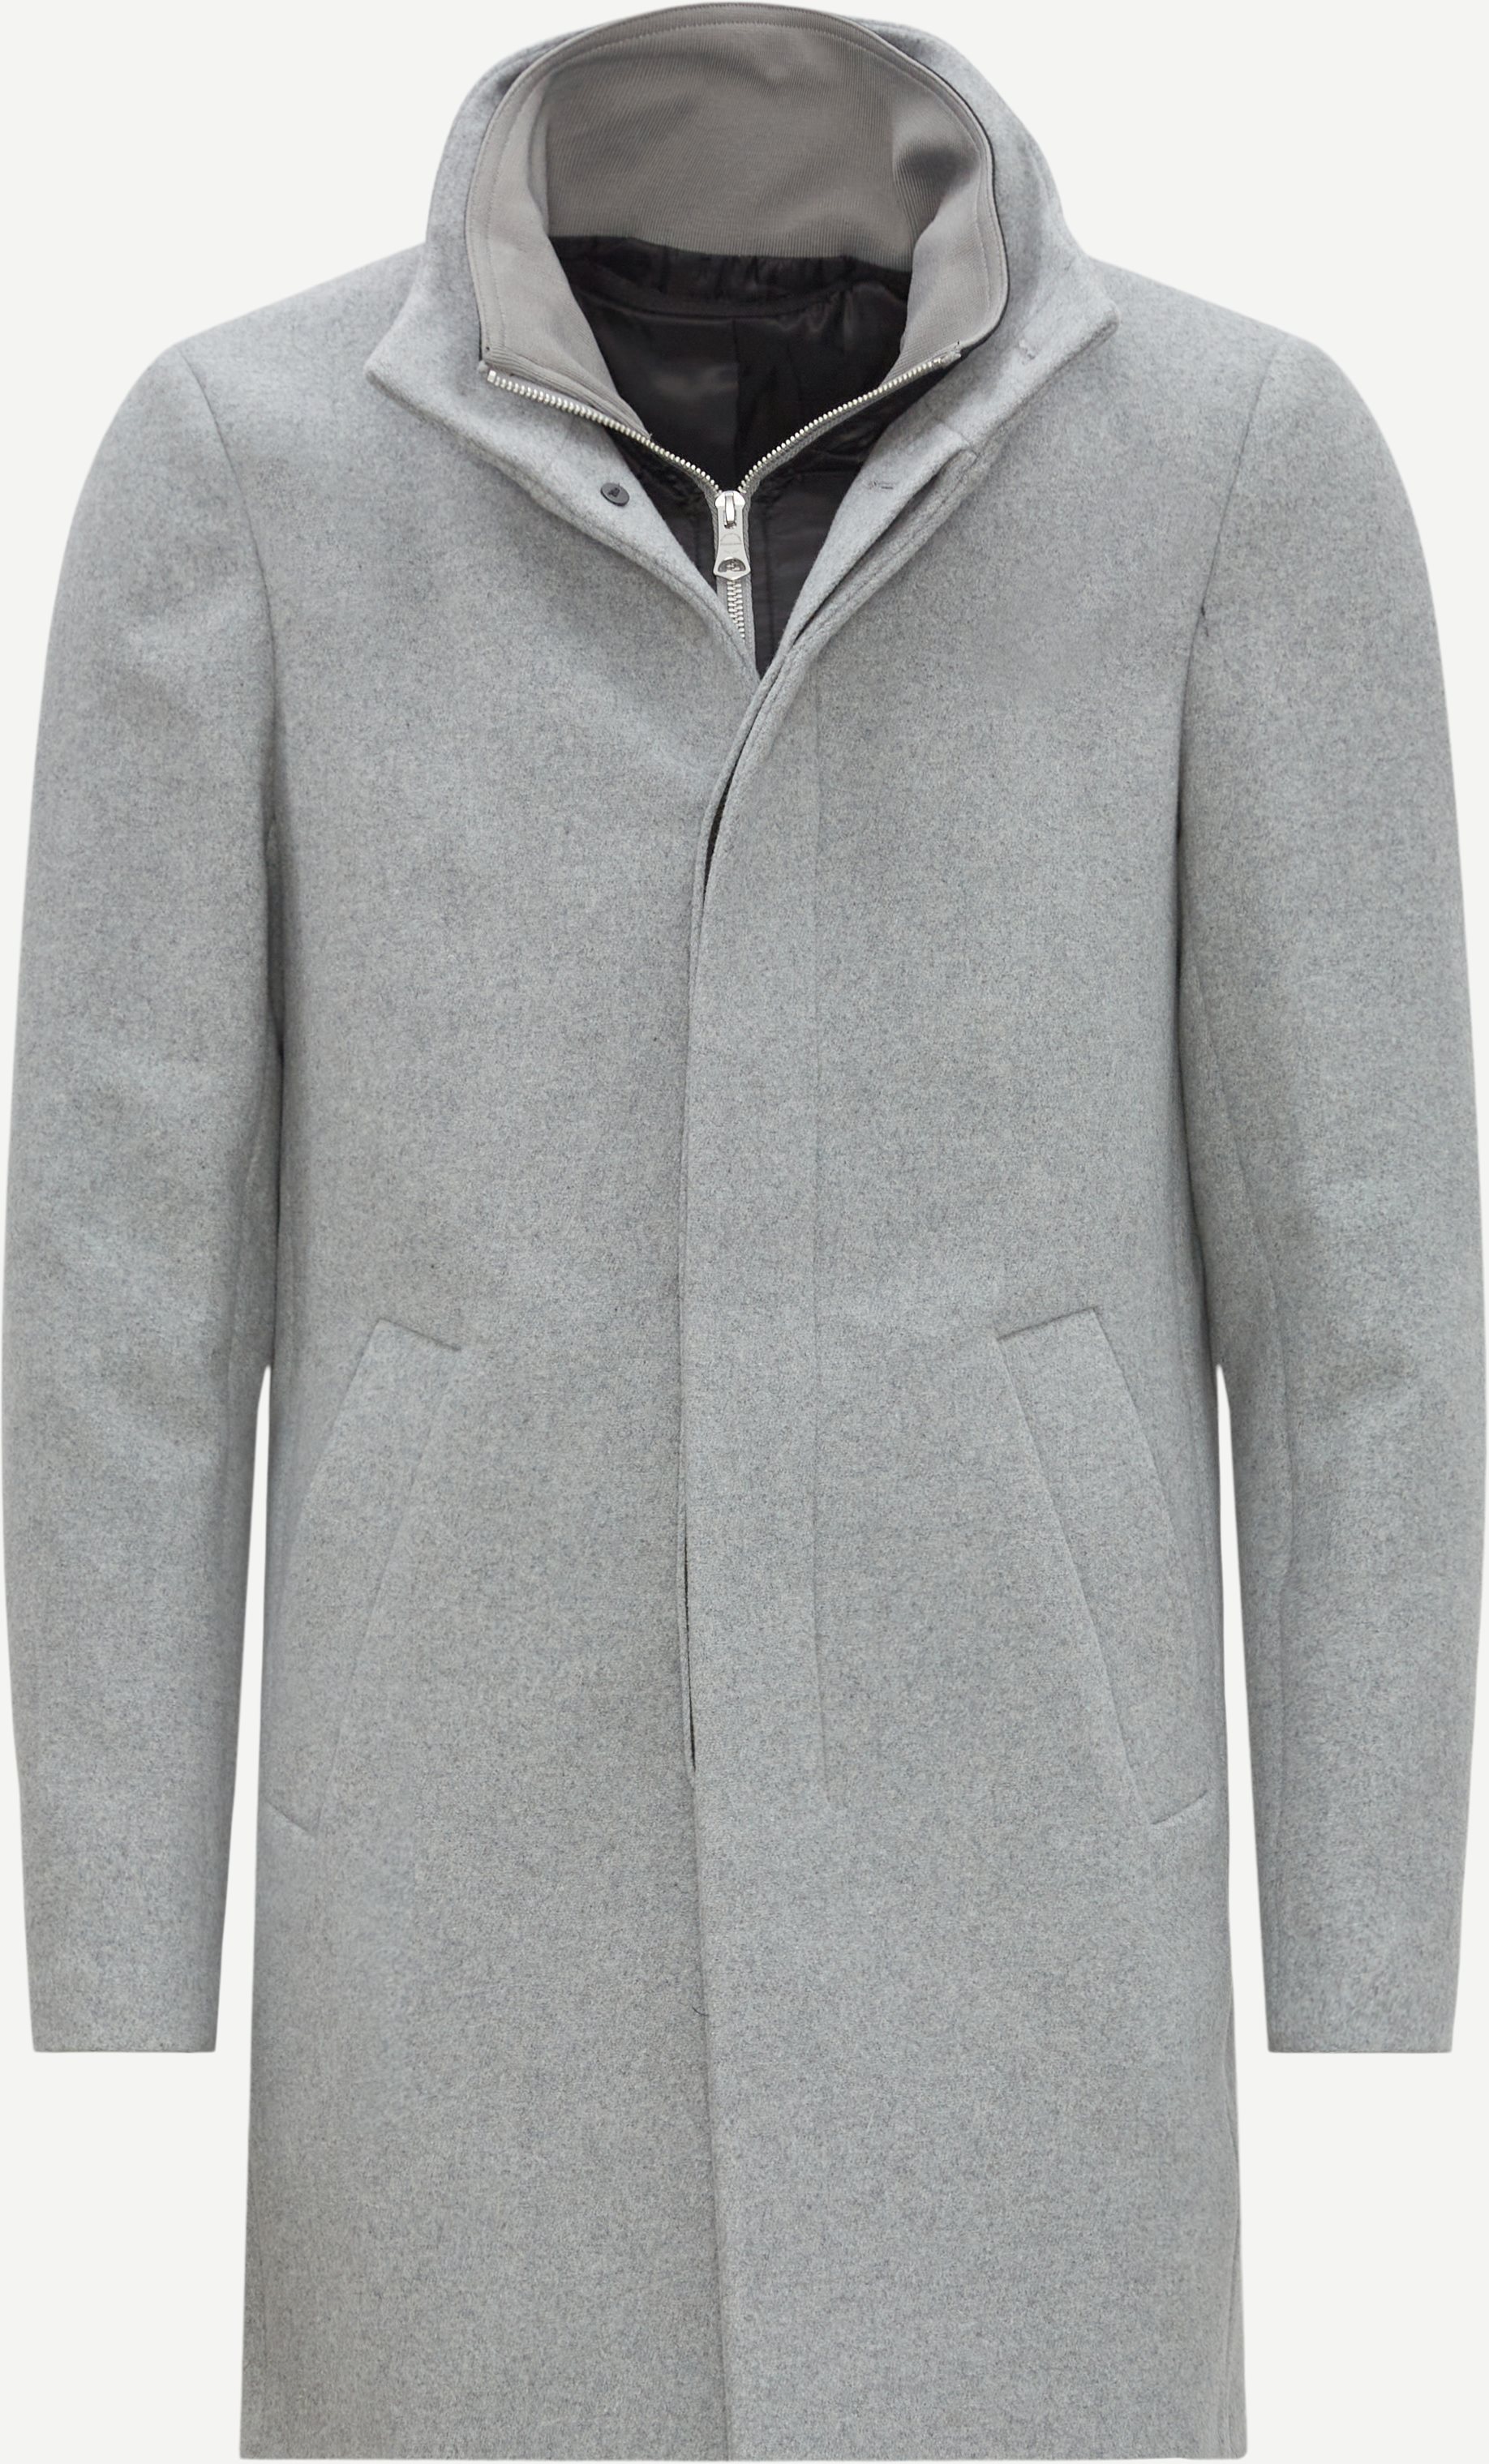 Matinique Jackets HARVEY N CLASSIC WOOL Grey